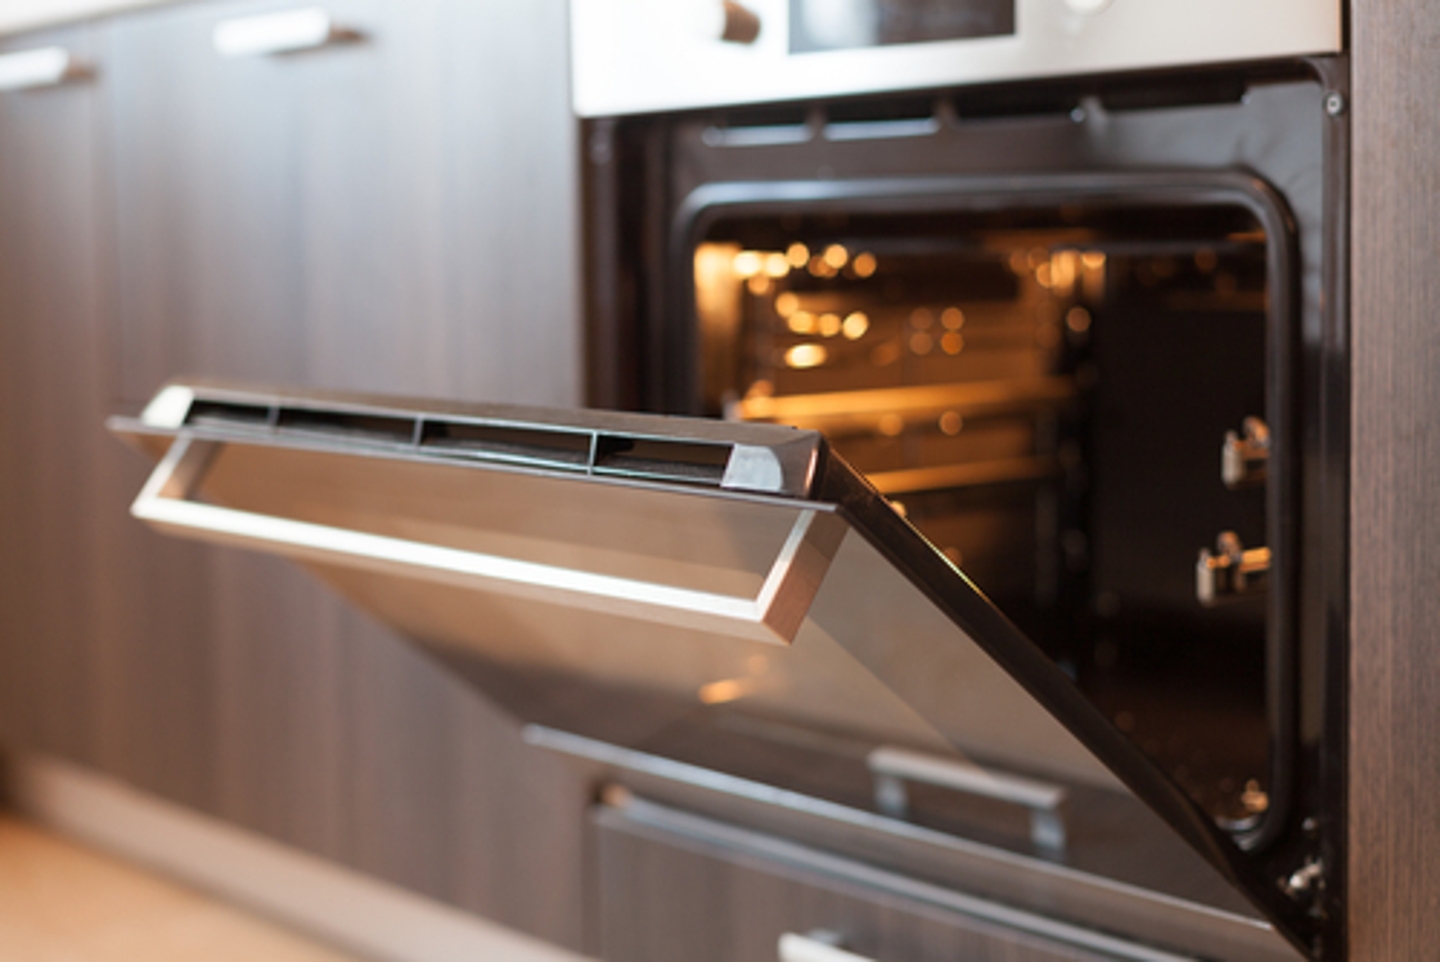 Your oven is a great source of heat for cooking but not for heating a room. 